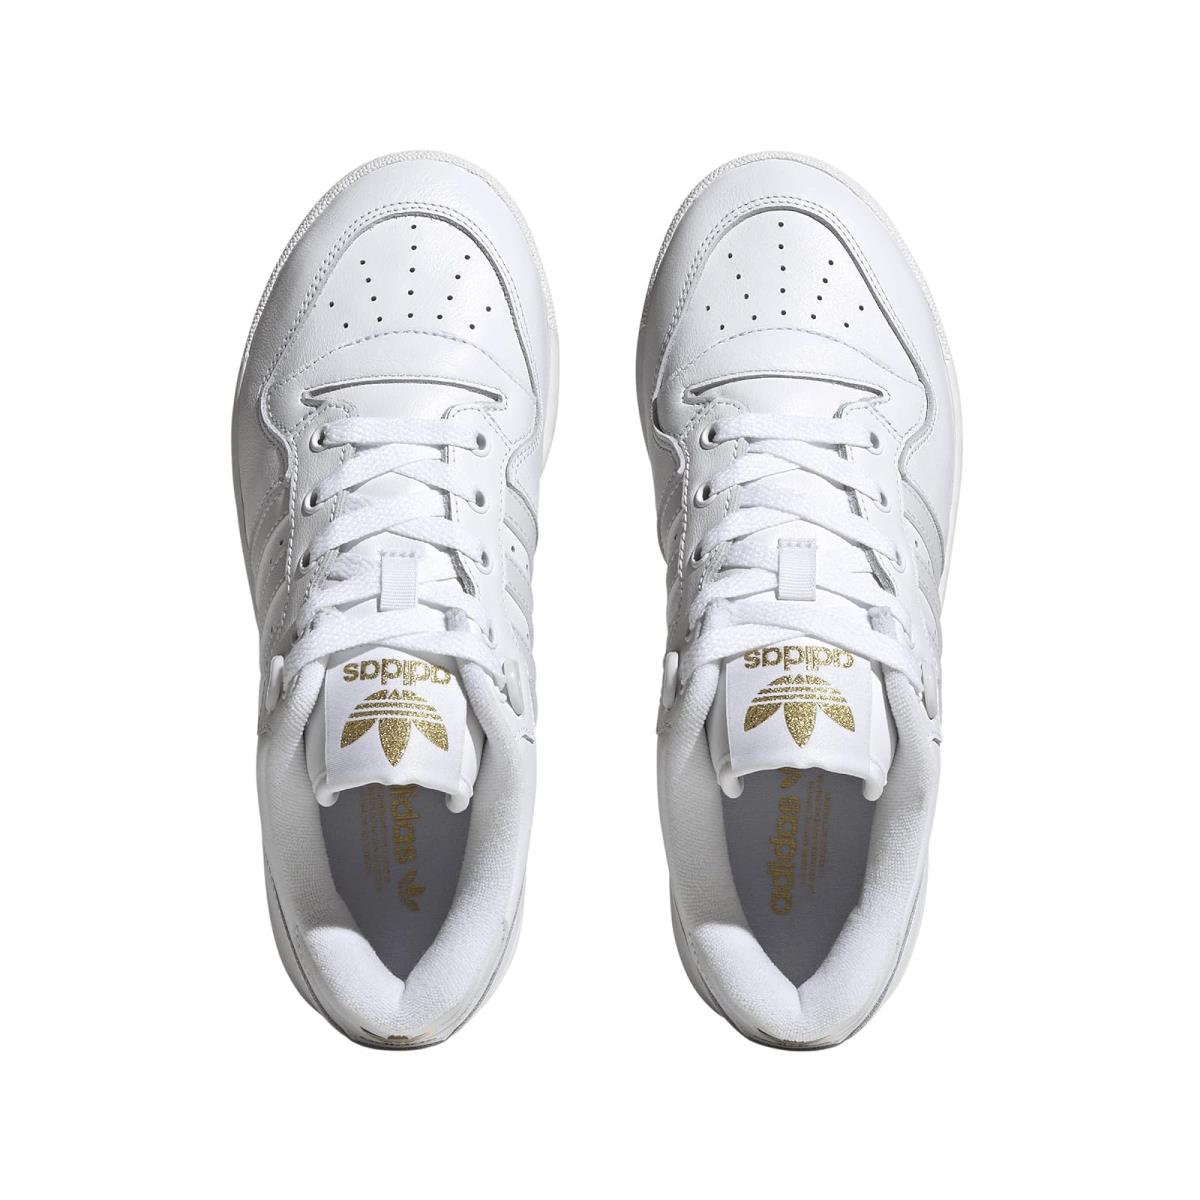 Woman`s Sneakers Athletic Shoes Adidas Originals Rivalry Low - White/Dash Grey/Gold Metallic